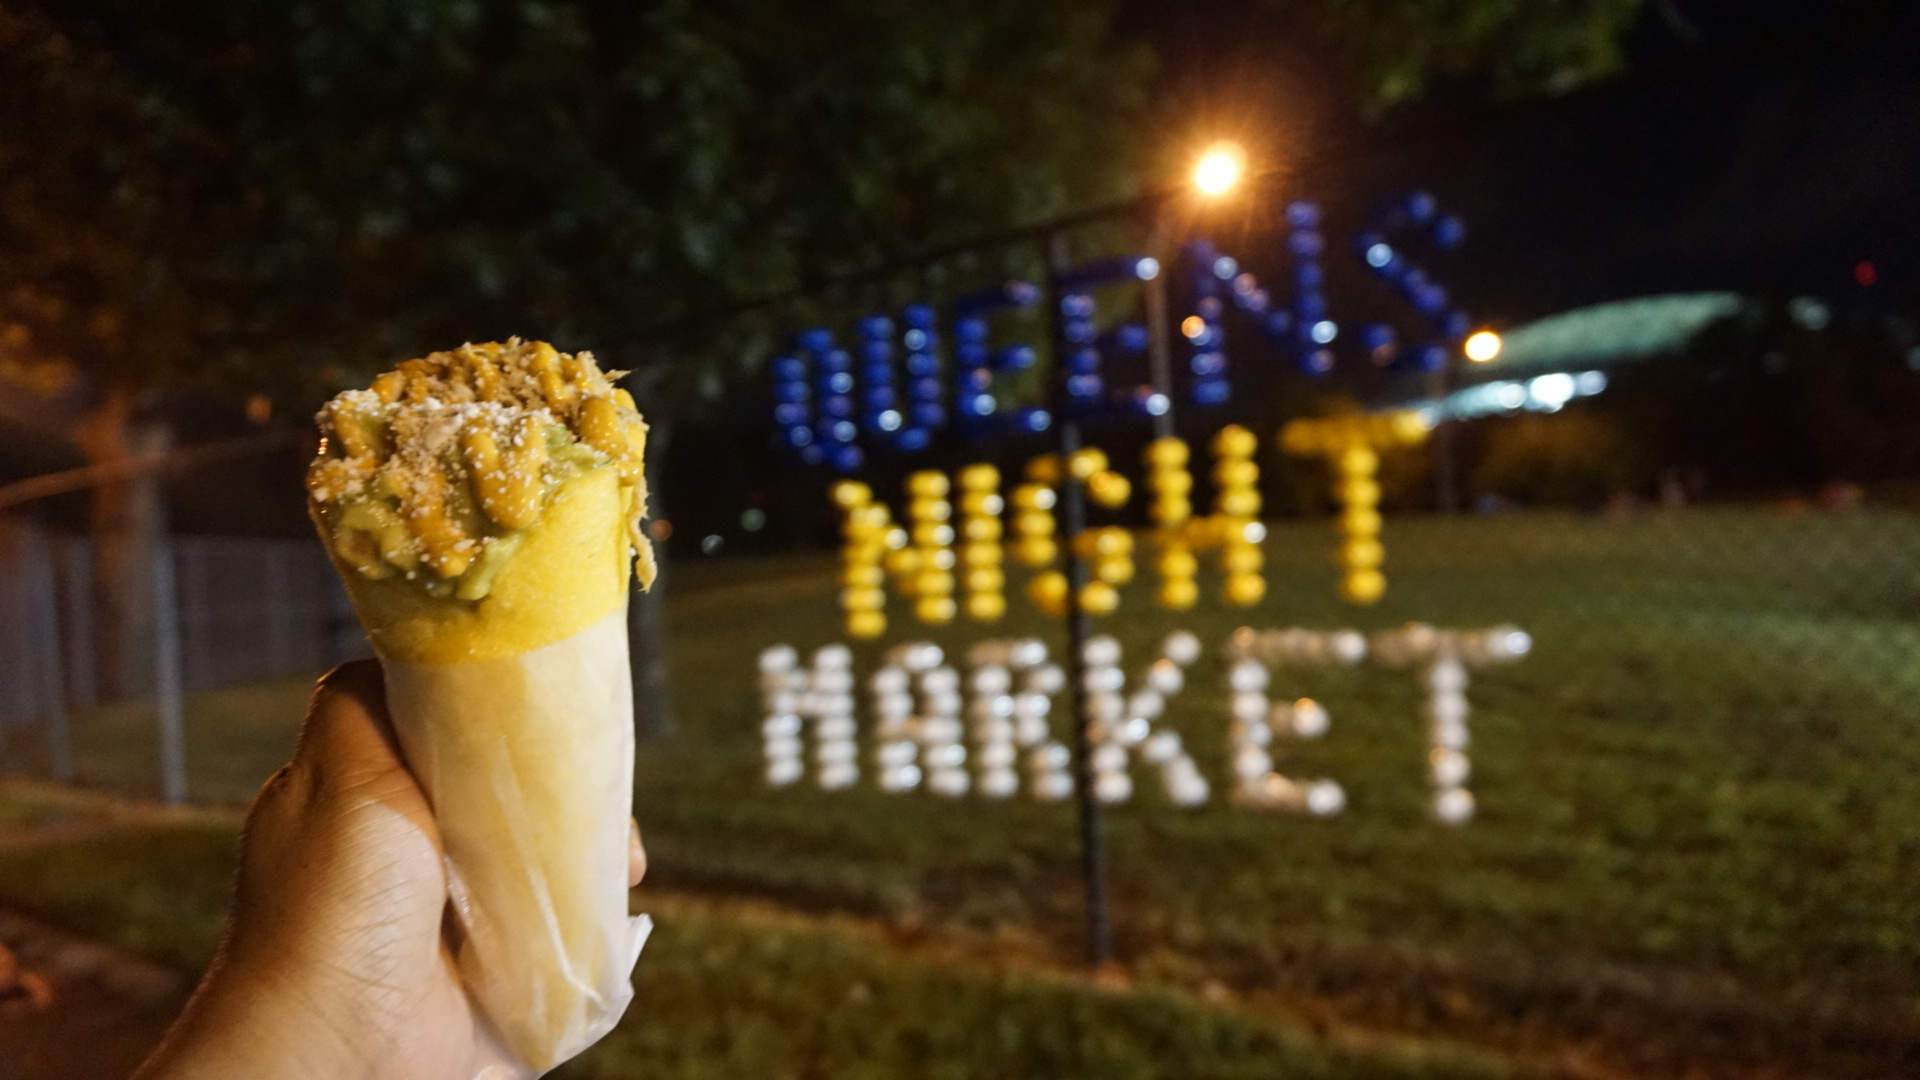 Queens Night Market 2019 Adds New Vendors at Flushing Meadows Corona Park -  Eater NY